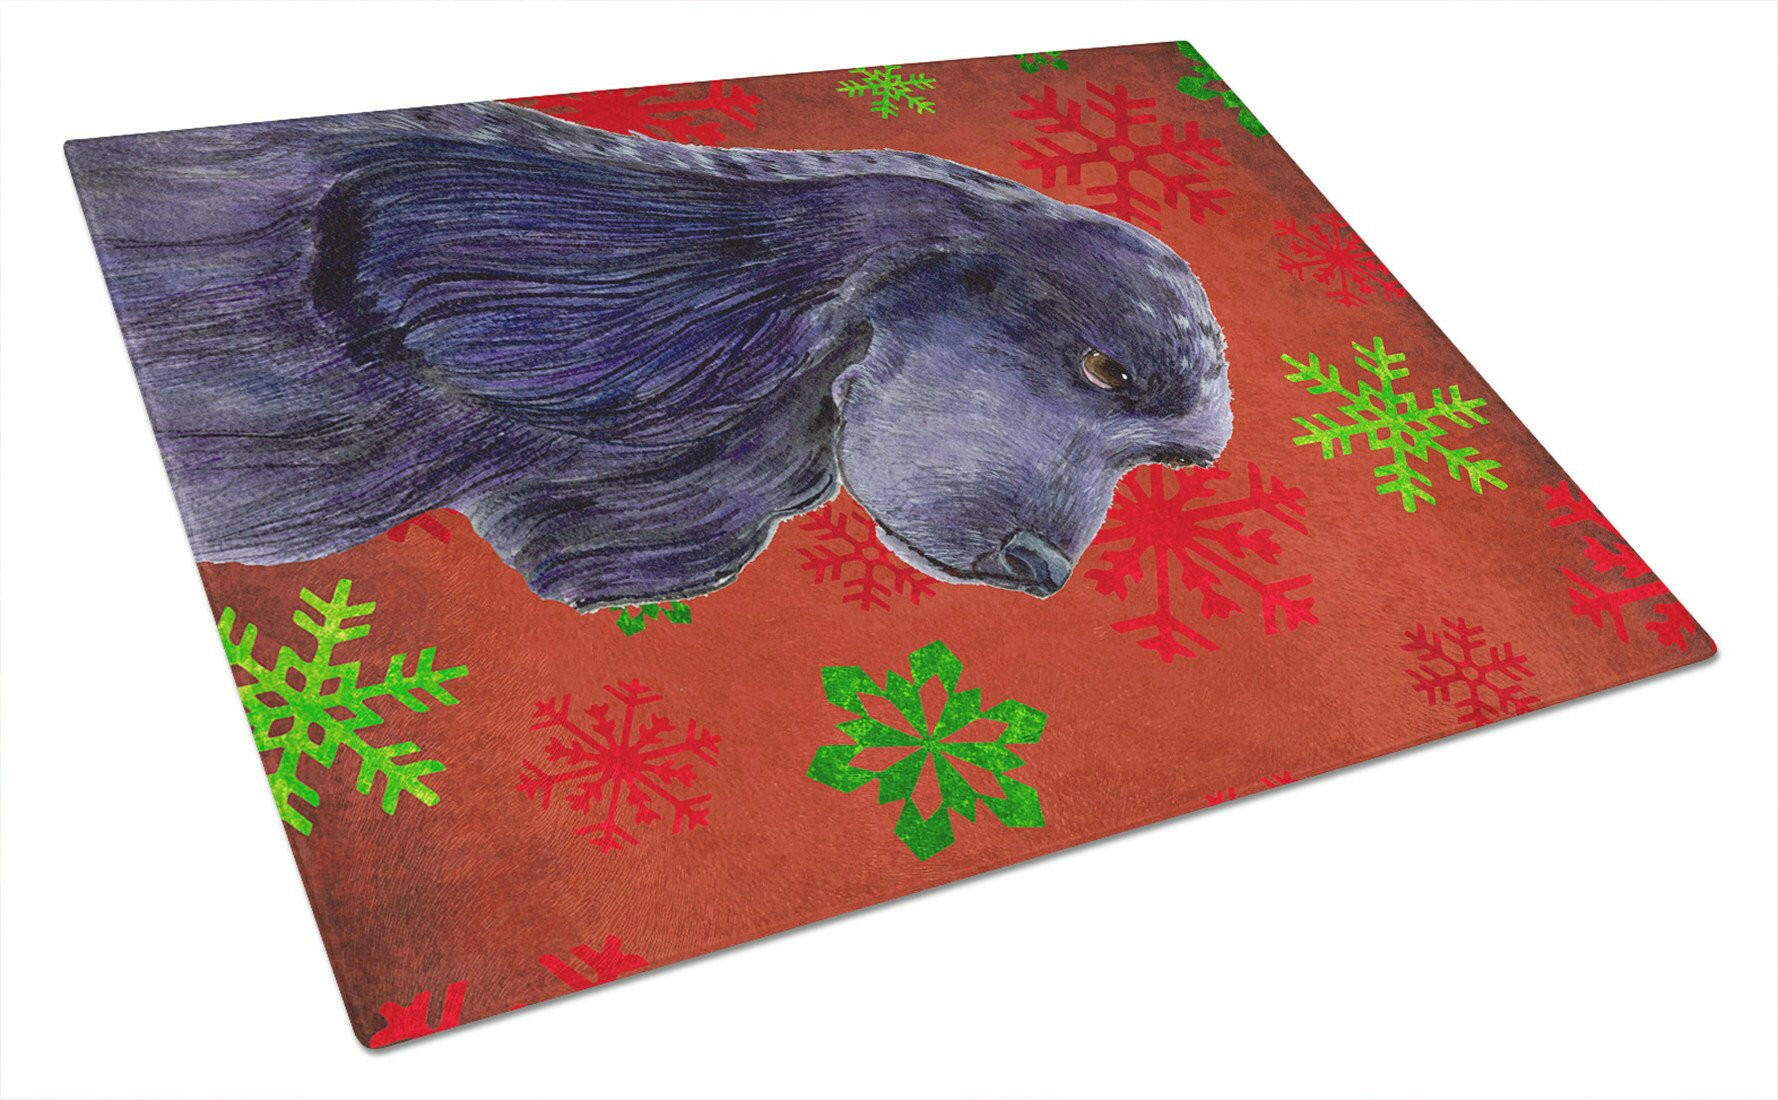 Cocker Spaniel Red and Green Snowflakes Christmas Glass Cutting Board Large by Caroline's Treasures